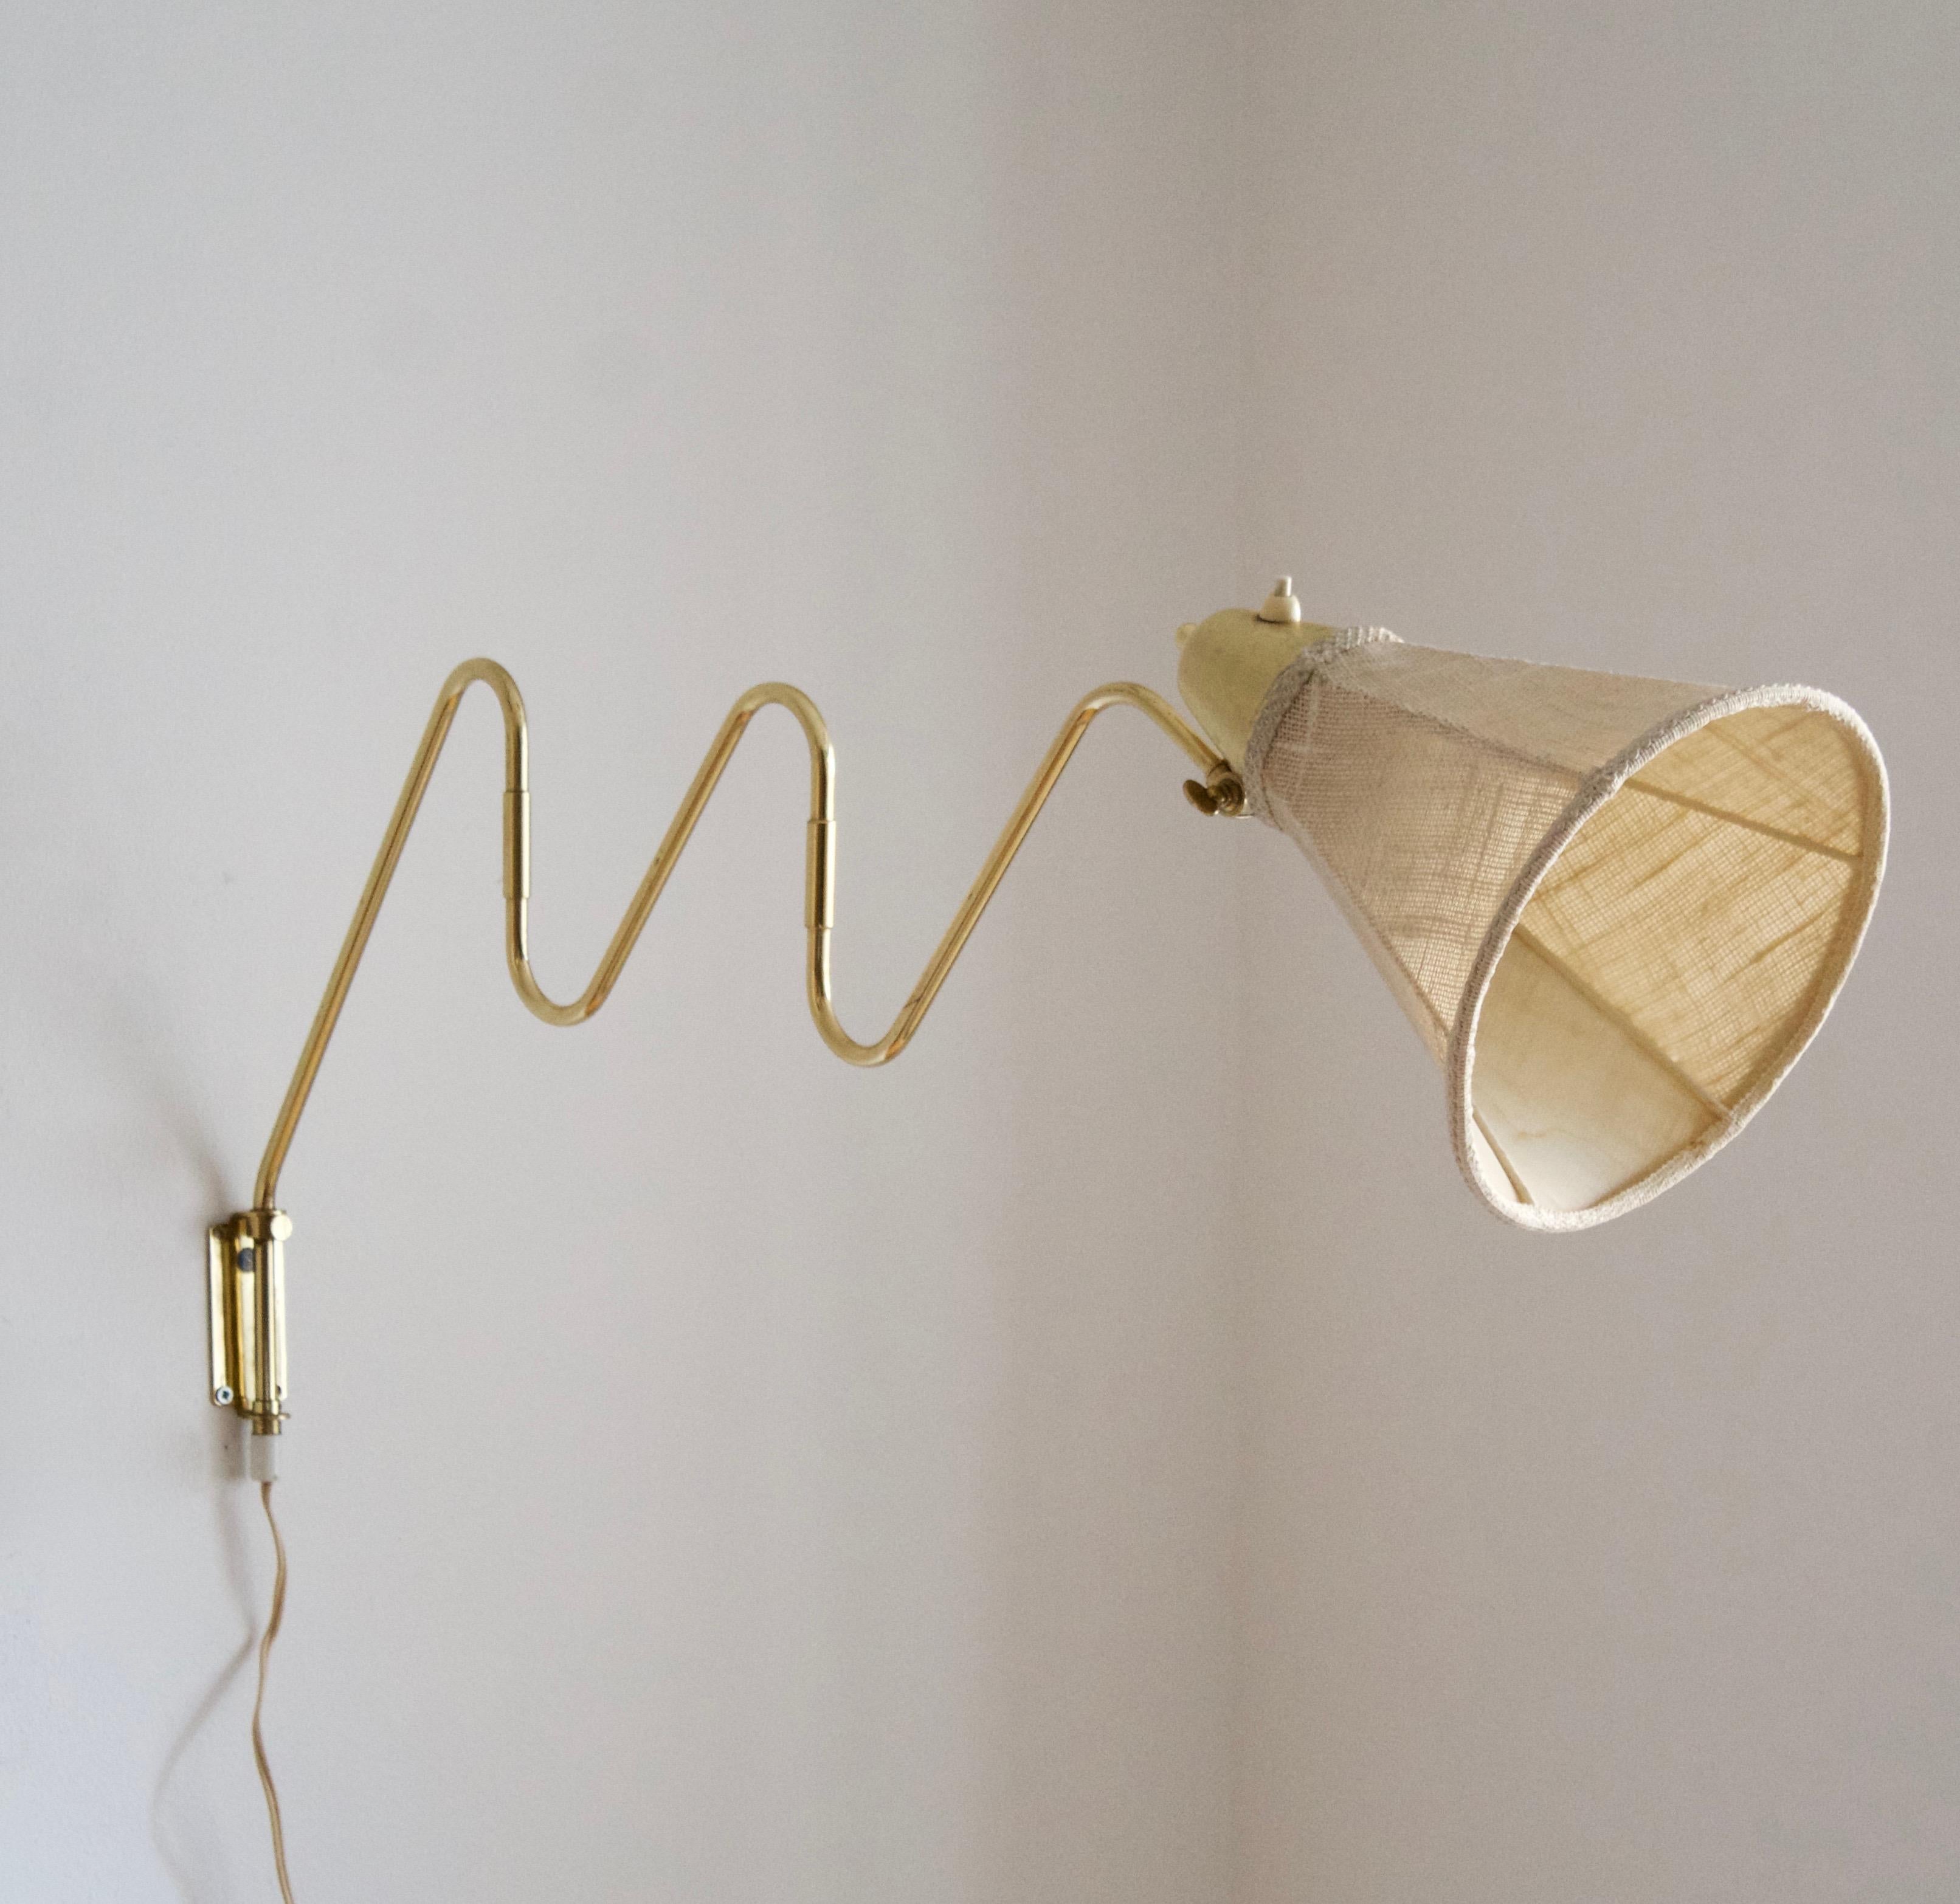 A functionalist wall light / task light, designed and produced in Sweden, 1940s. Features brass. Original fabric lampshade.

Stated dimensions with lampshade attached as is illustrated in the primary image.